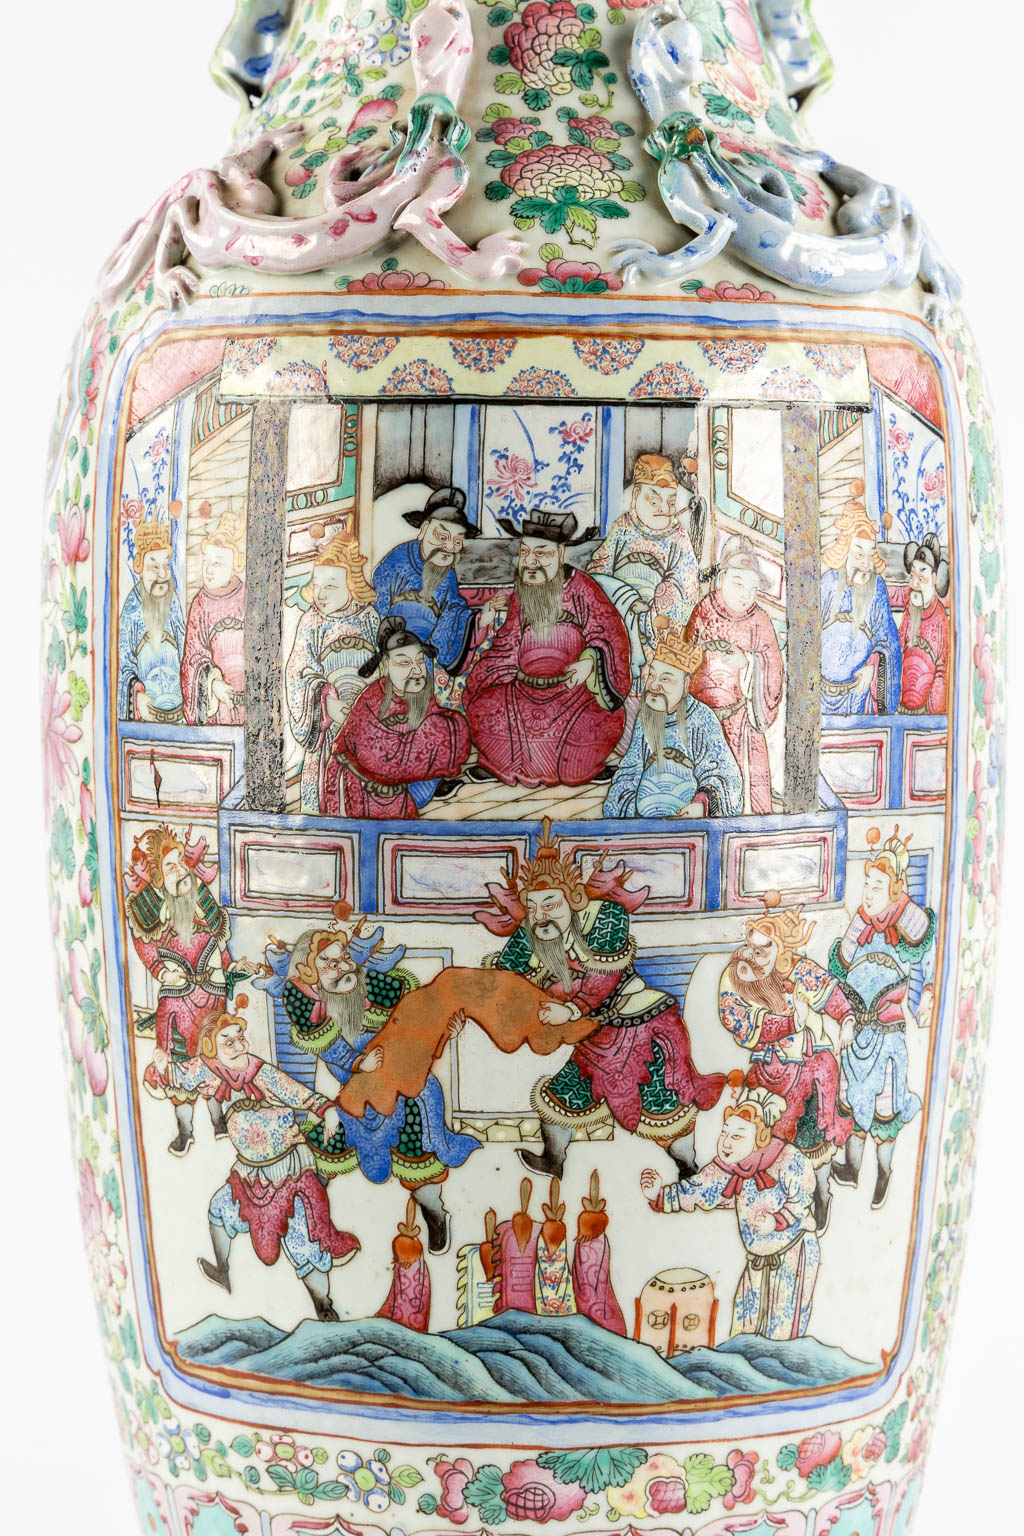 A Chinese Famille Rose vase decorated with figurines. (H:63,5 x D:23 cm) - Image 12 of 13